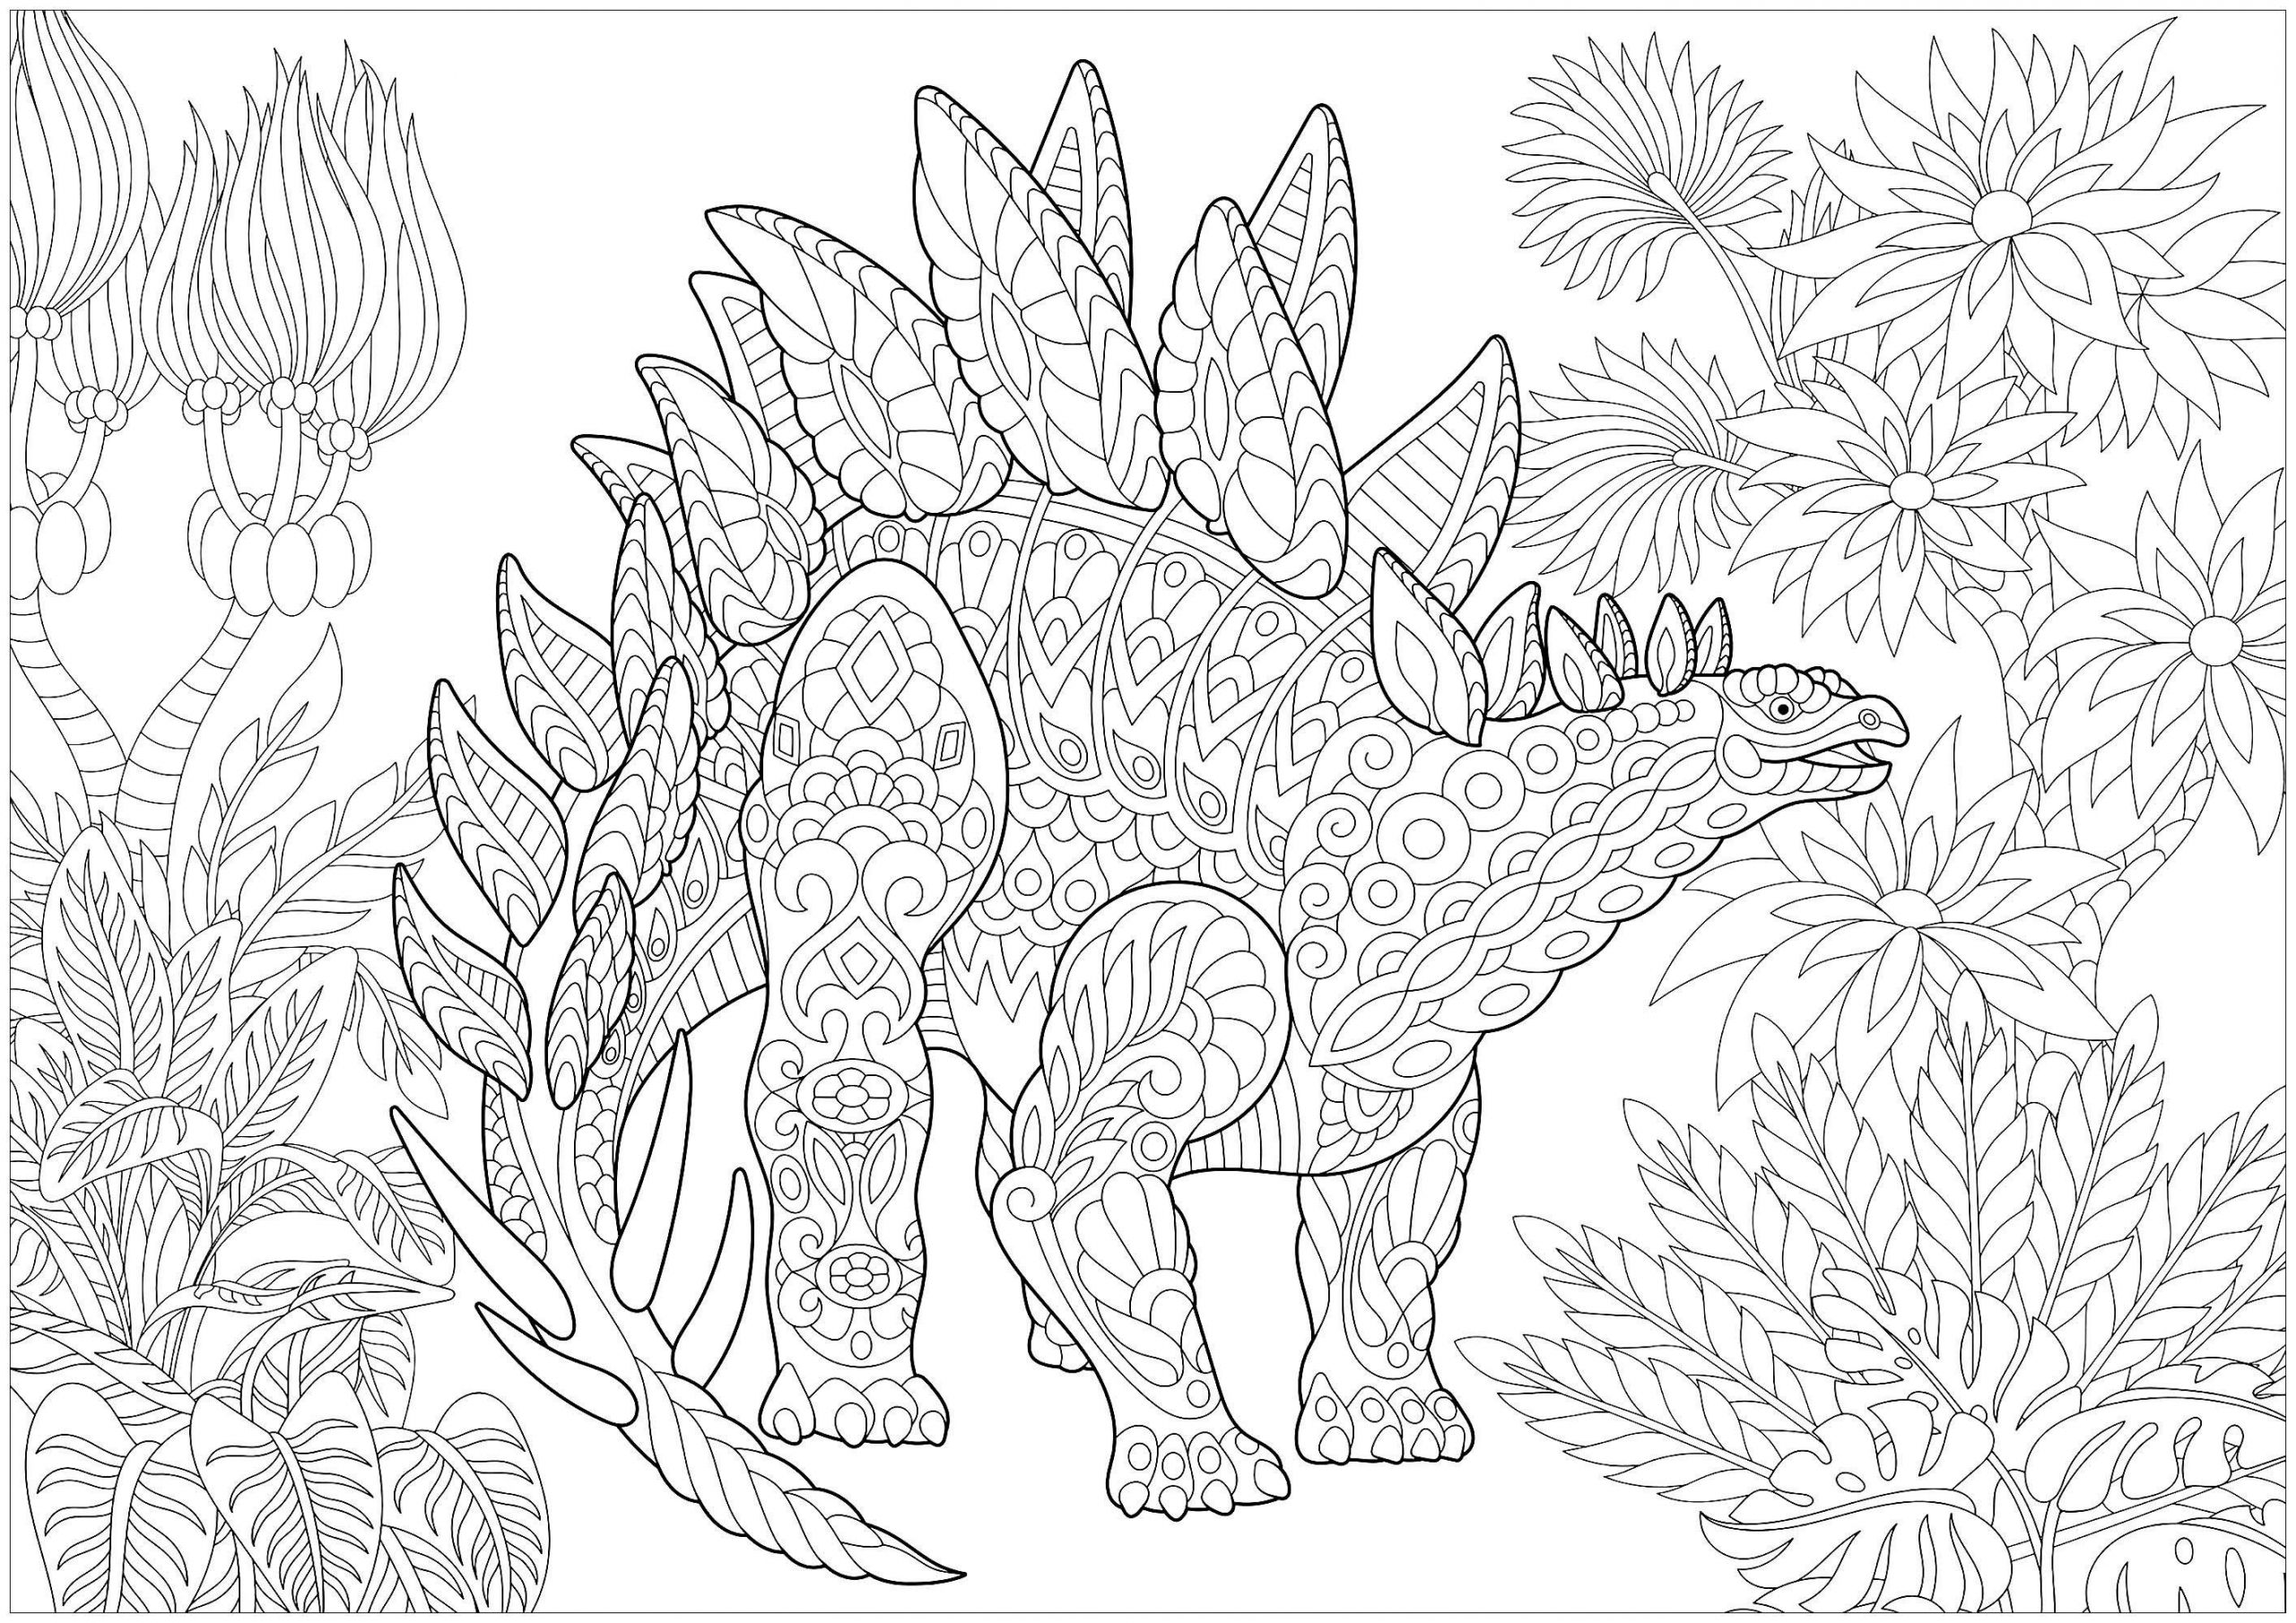 Dinosaur Coloring Pages For Adults
 Stegosaurus Dinosaurs Coloring Pages for Adults Just